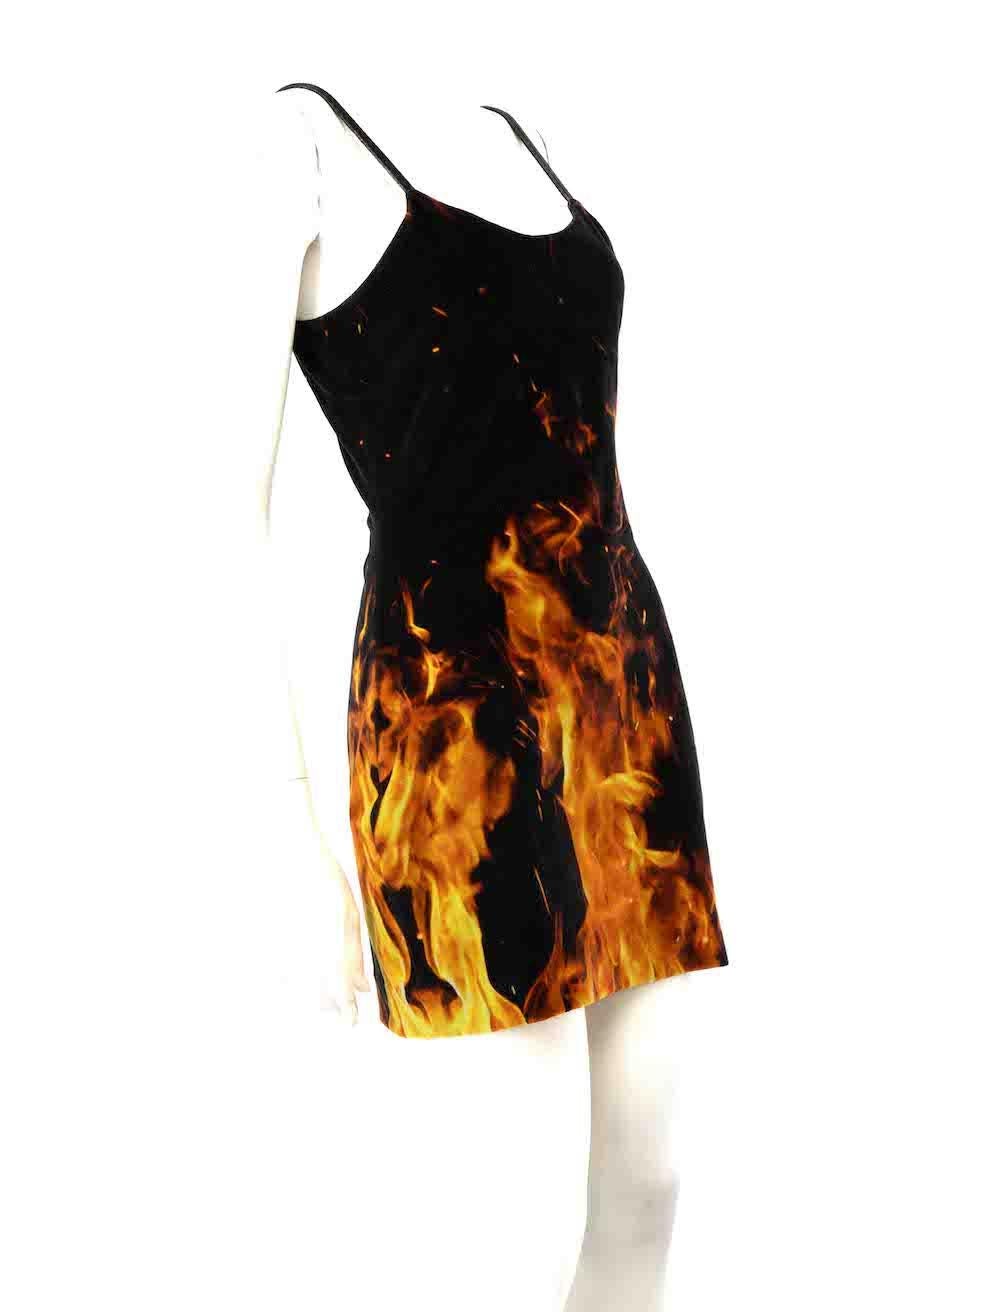 CONDITION is Very good. Hardly any visible wear to dress is evident on this used Balmain designer resale item.
 
 
 
 Details
 
 
 Black
 
 Velvet
 
 Mini body con dress
 
 Flame print
 
 Round neckline
 
 Sleeveless
 
 Back zip closure
 
 
 
 
 
